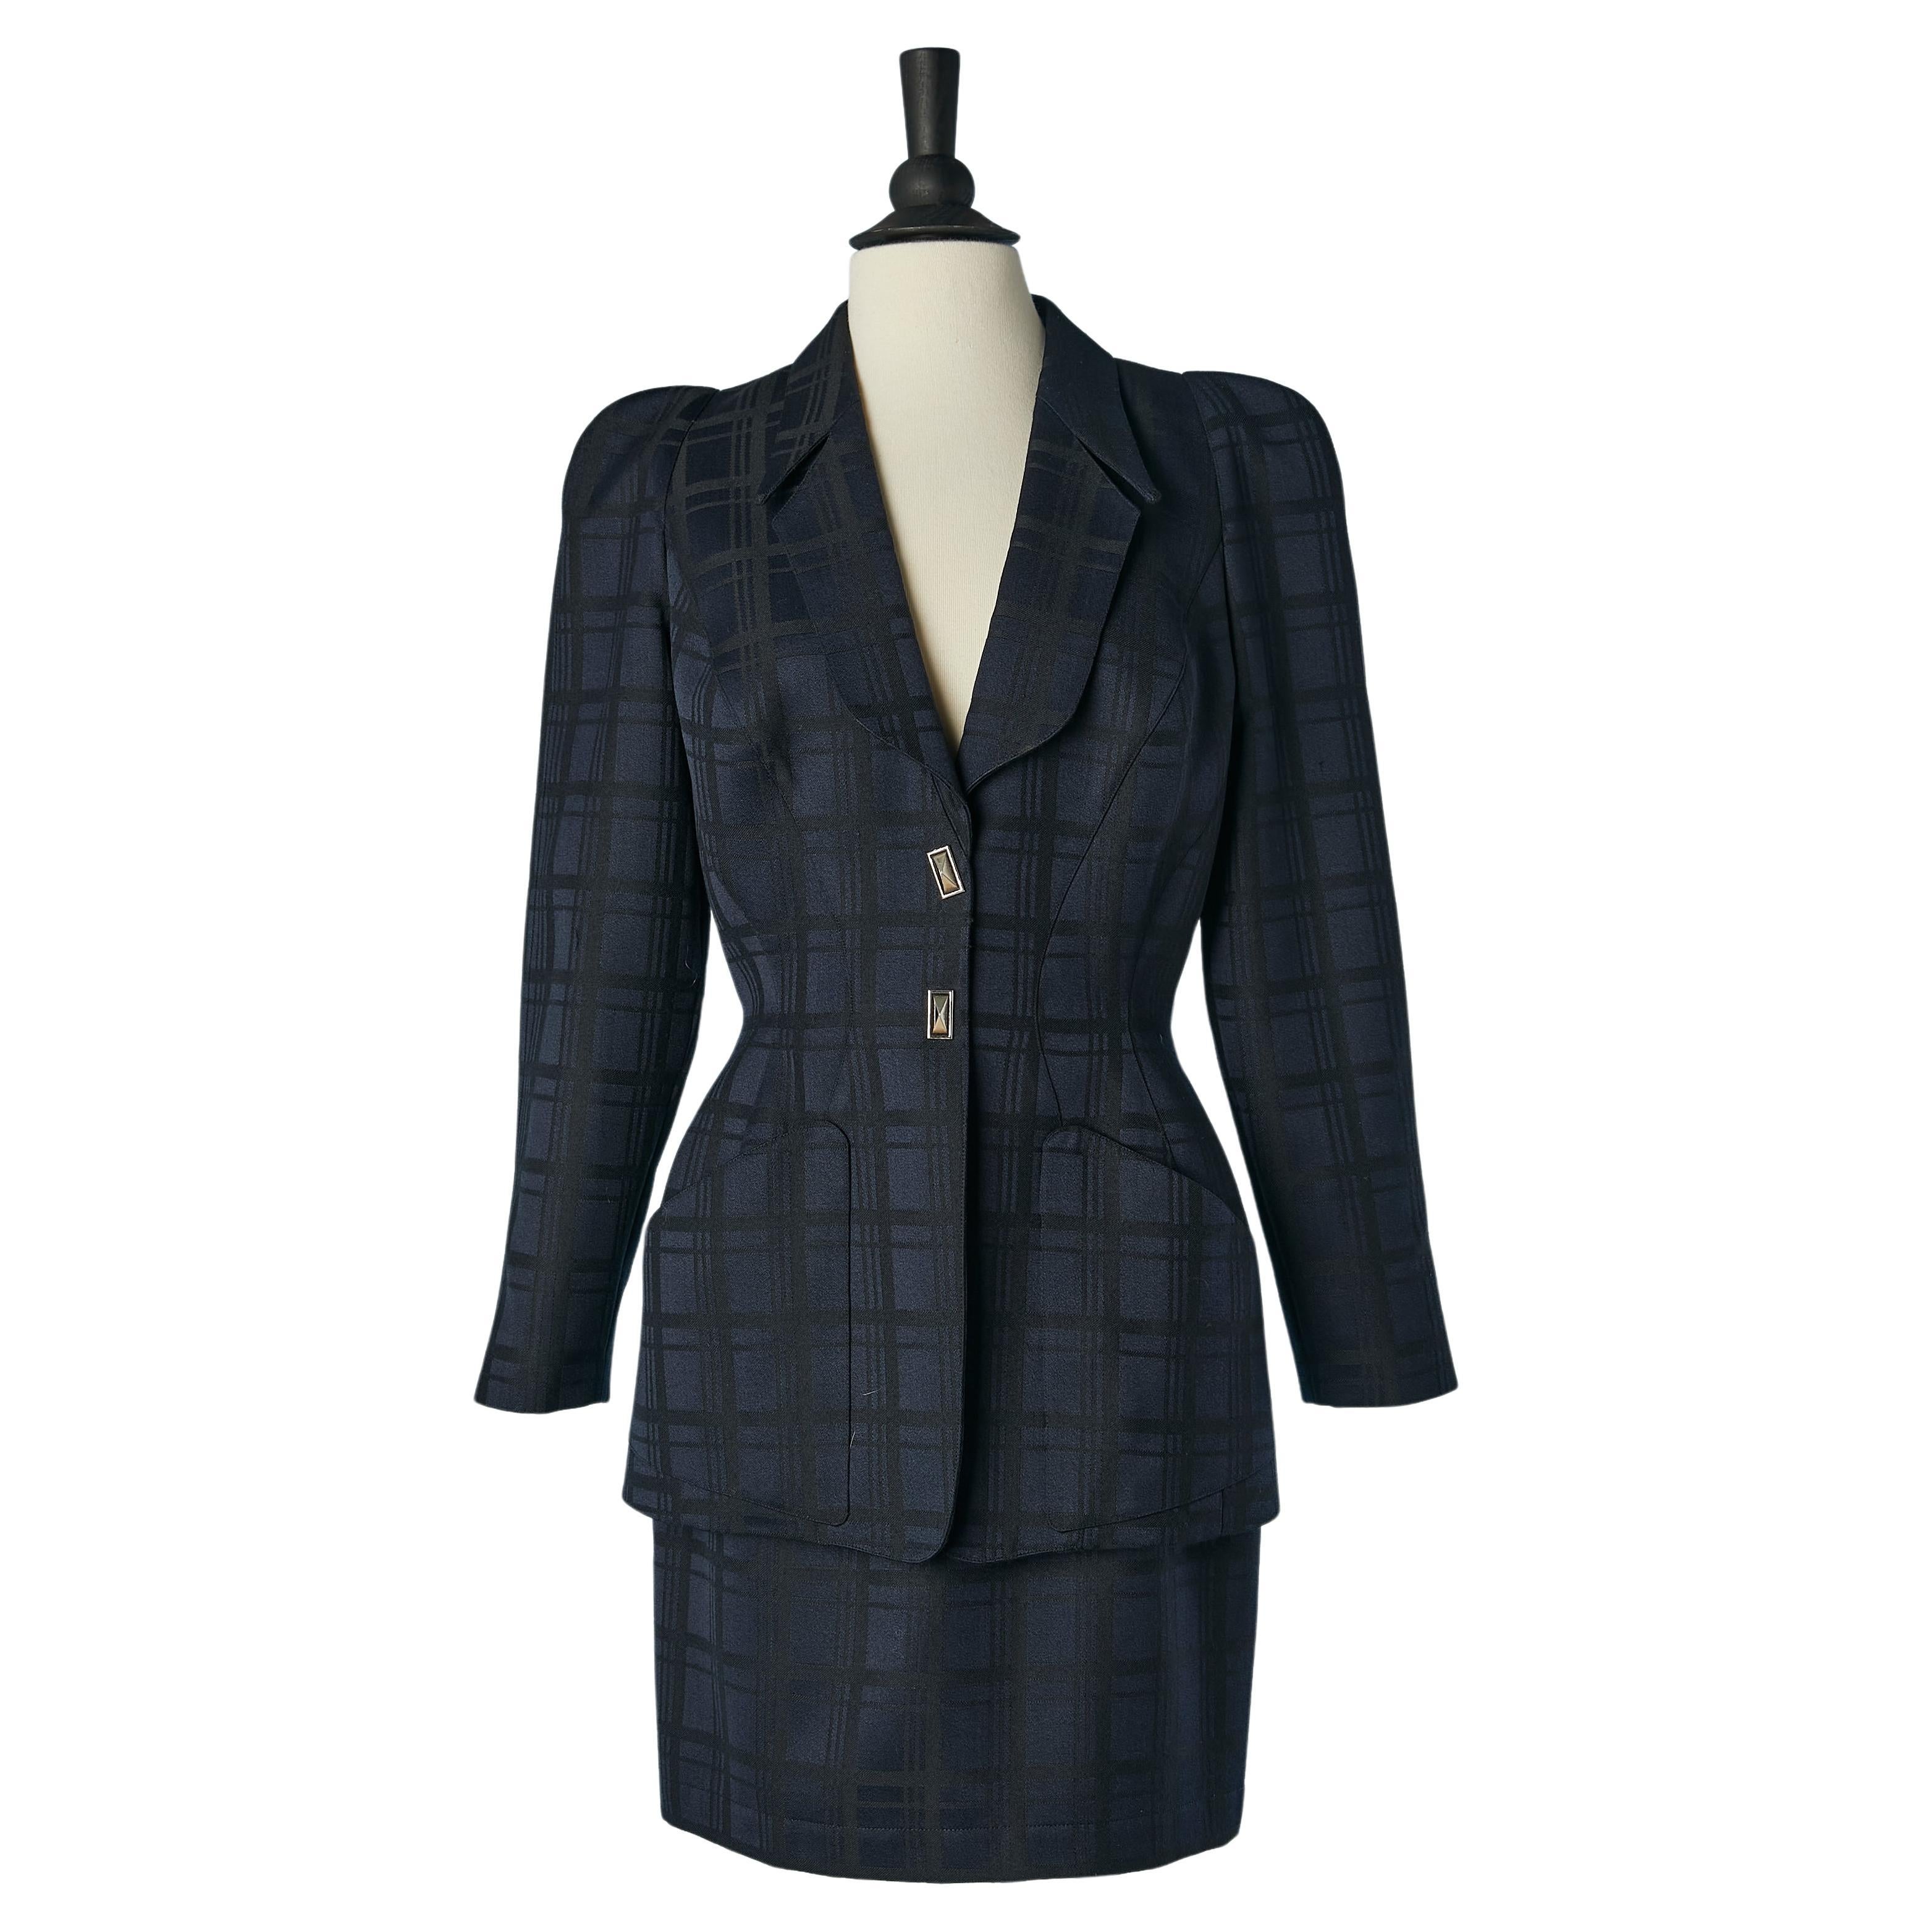 Navy blue and black check pattern jacquard skirt-suit Thierry Mugler Circa 1990 For Sale